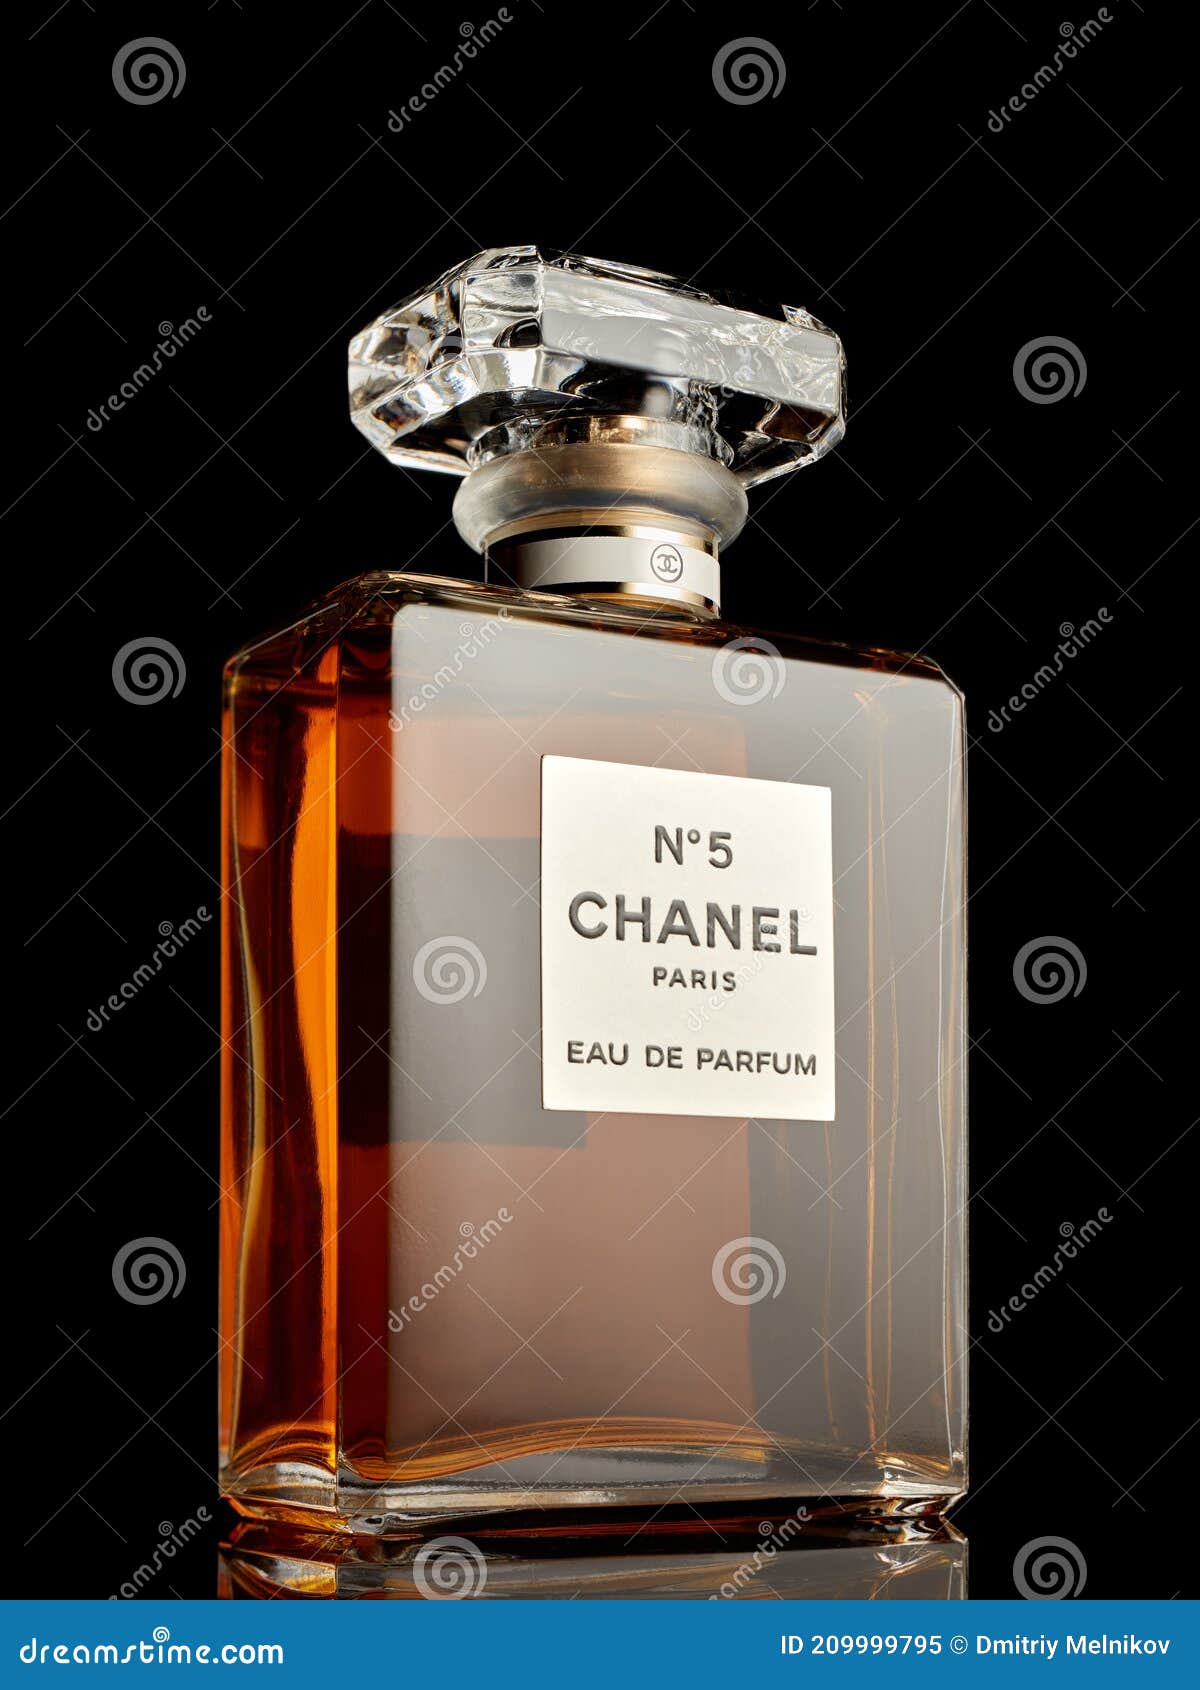 Bottle of Perfume Chanel â„– 5. on Black Background. Coco Chanel